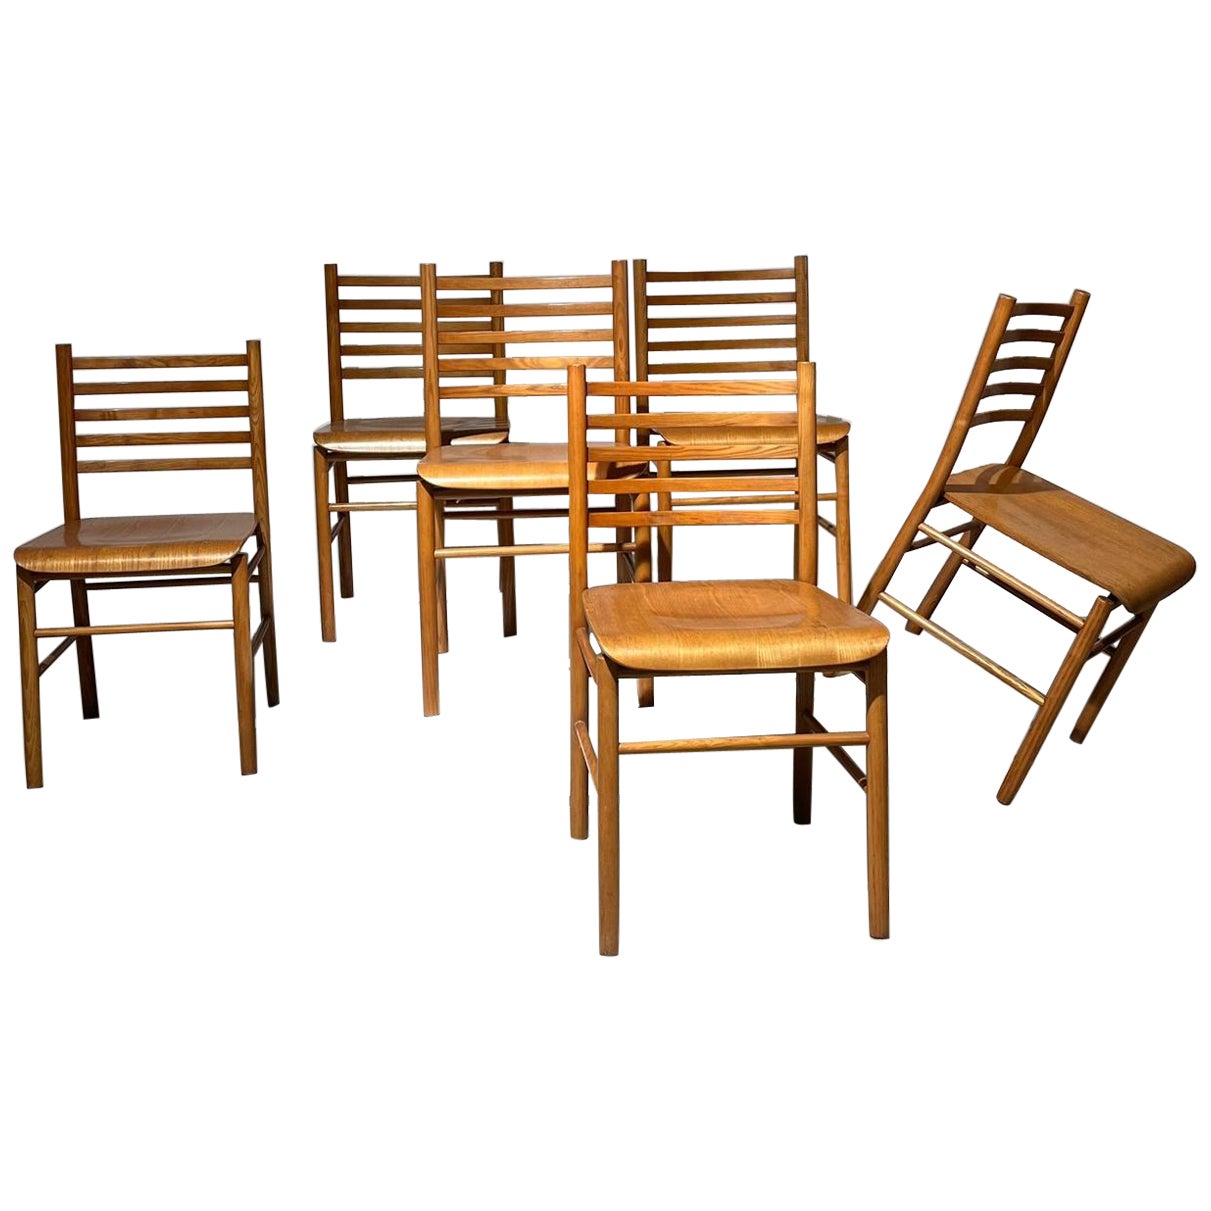 Set of 6 Light Wood Dining Chairs